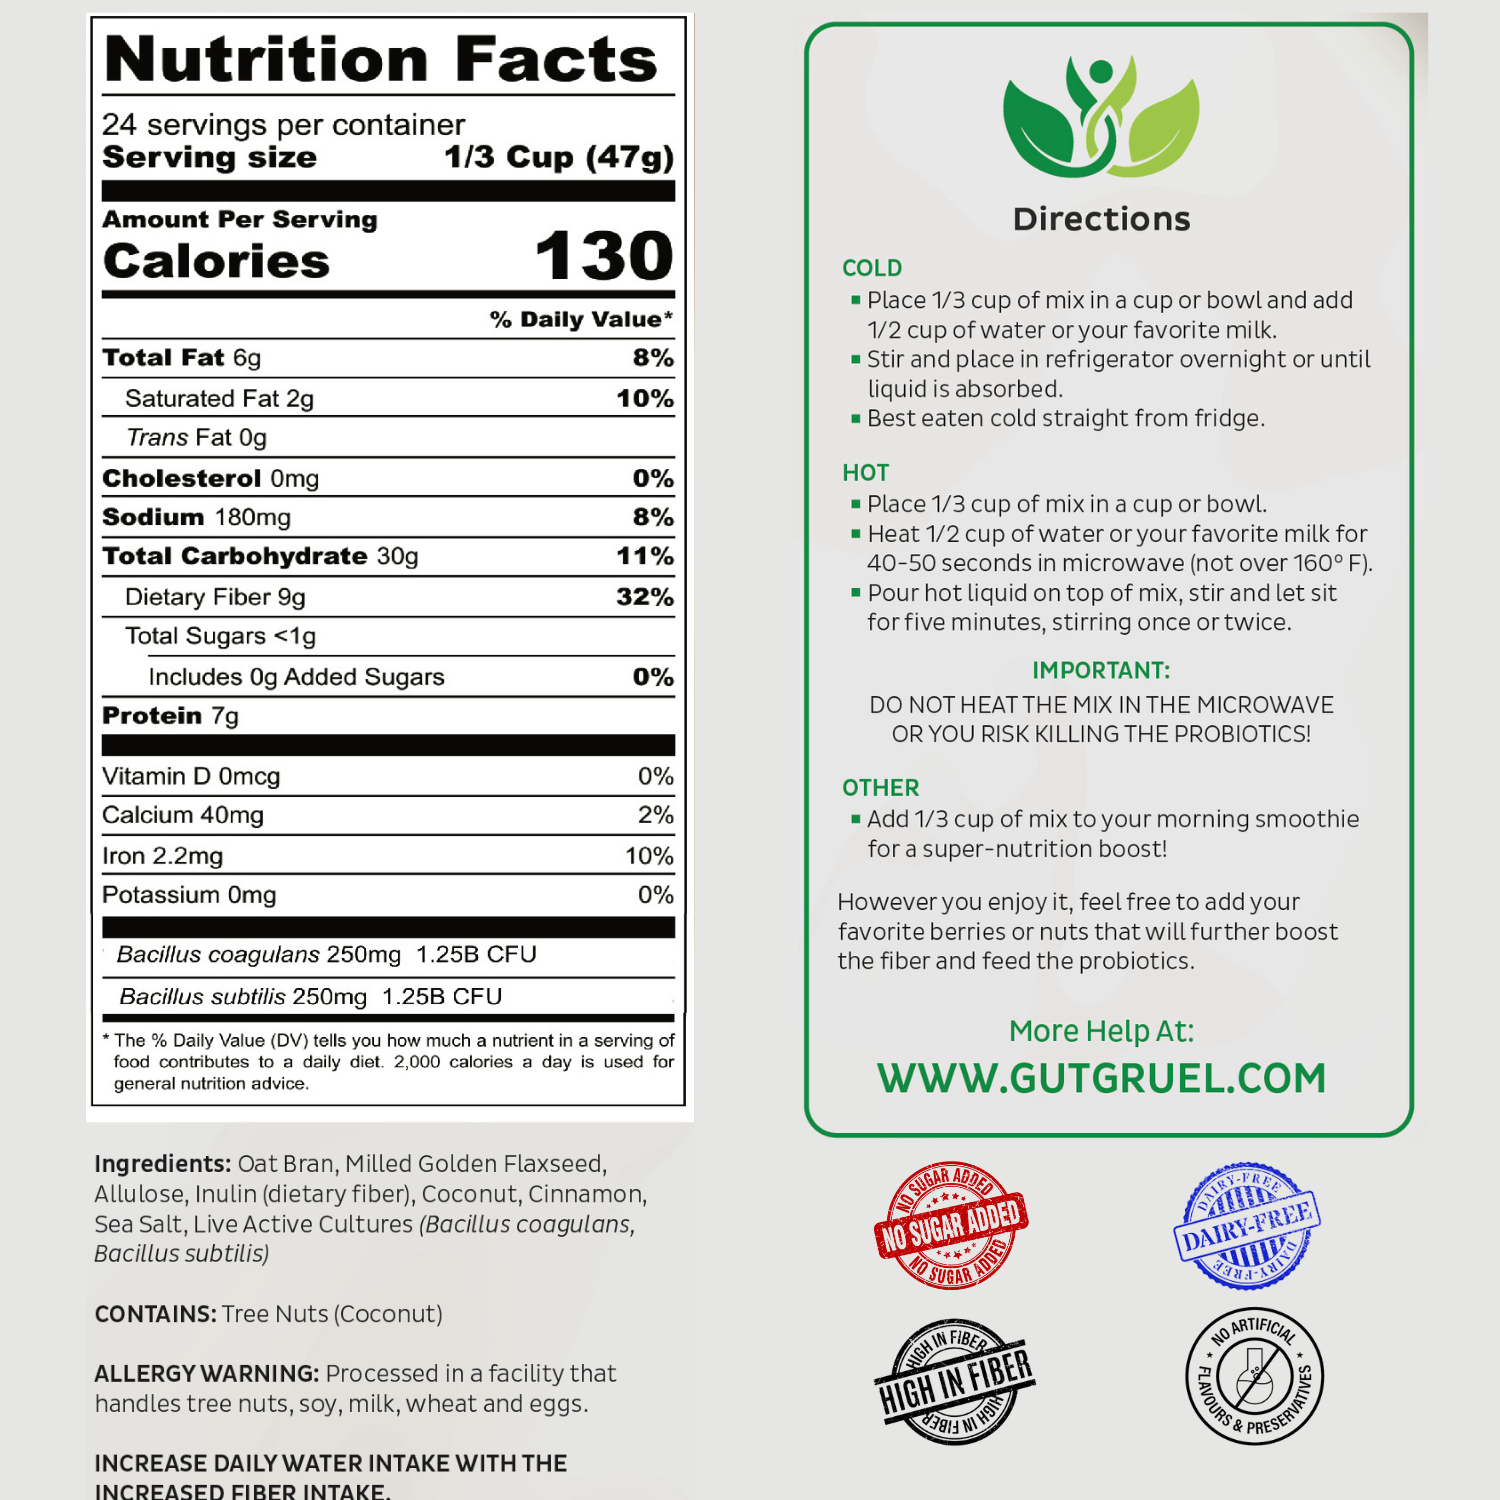 Image of Nutritional panel and directions